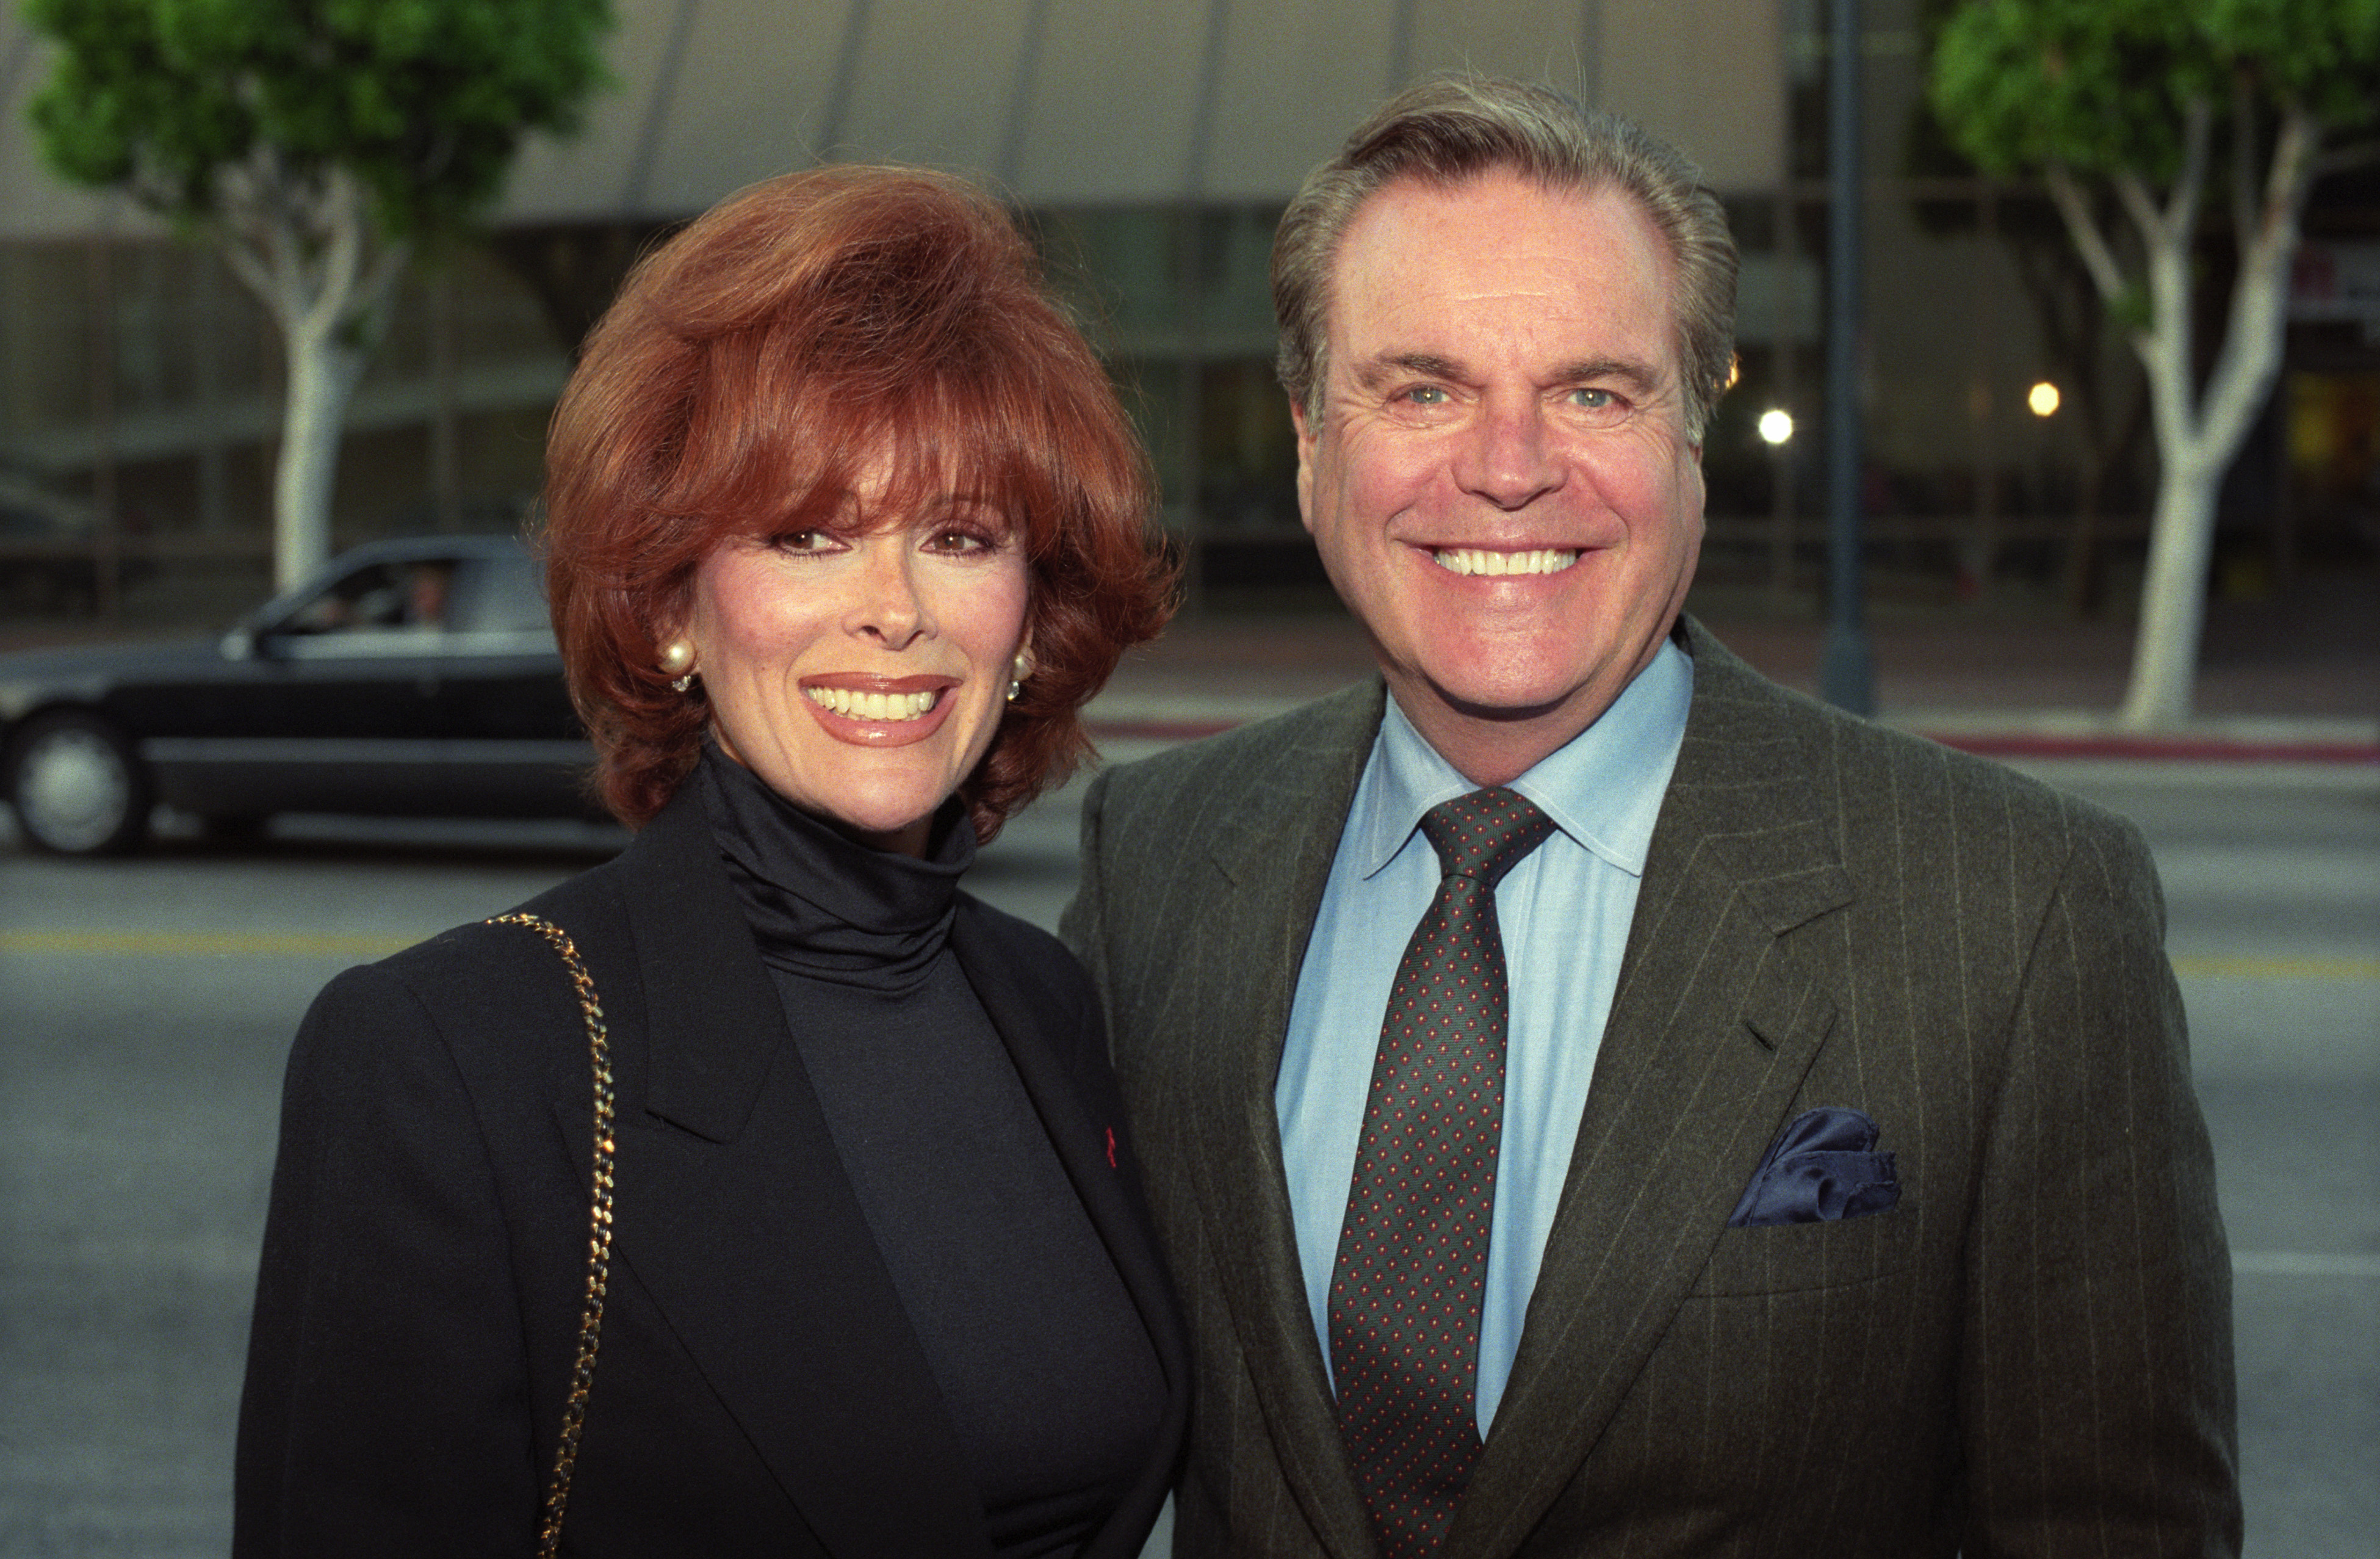 Jill St. John and Robert Wagner in Los Angeles, California in 1997 | Source: Getty Images